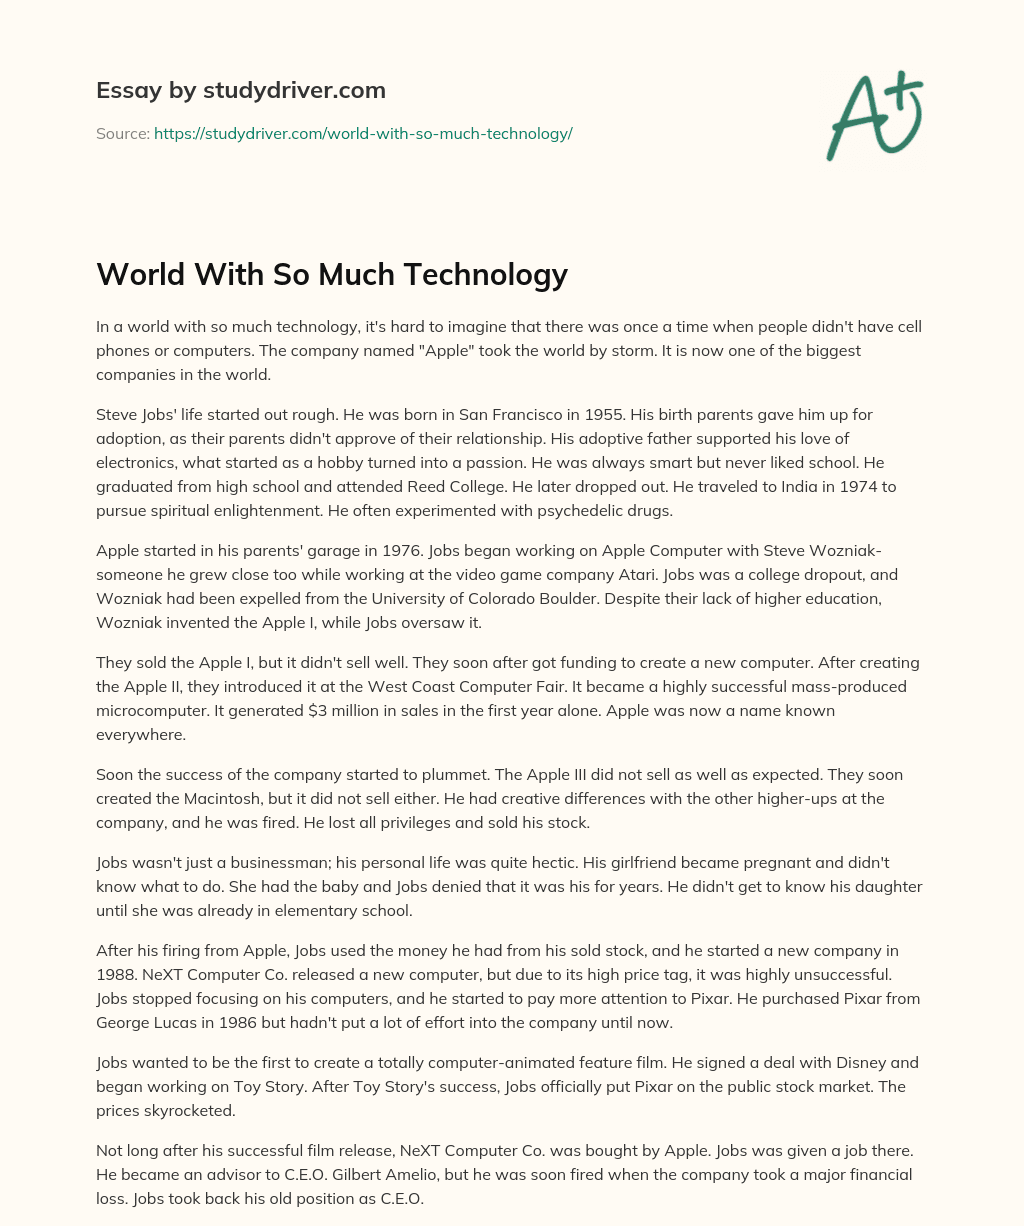 World with so Much Technology essay